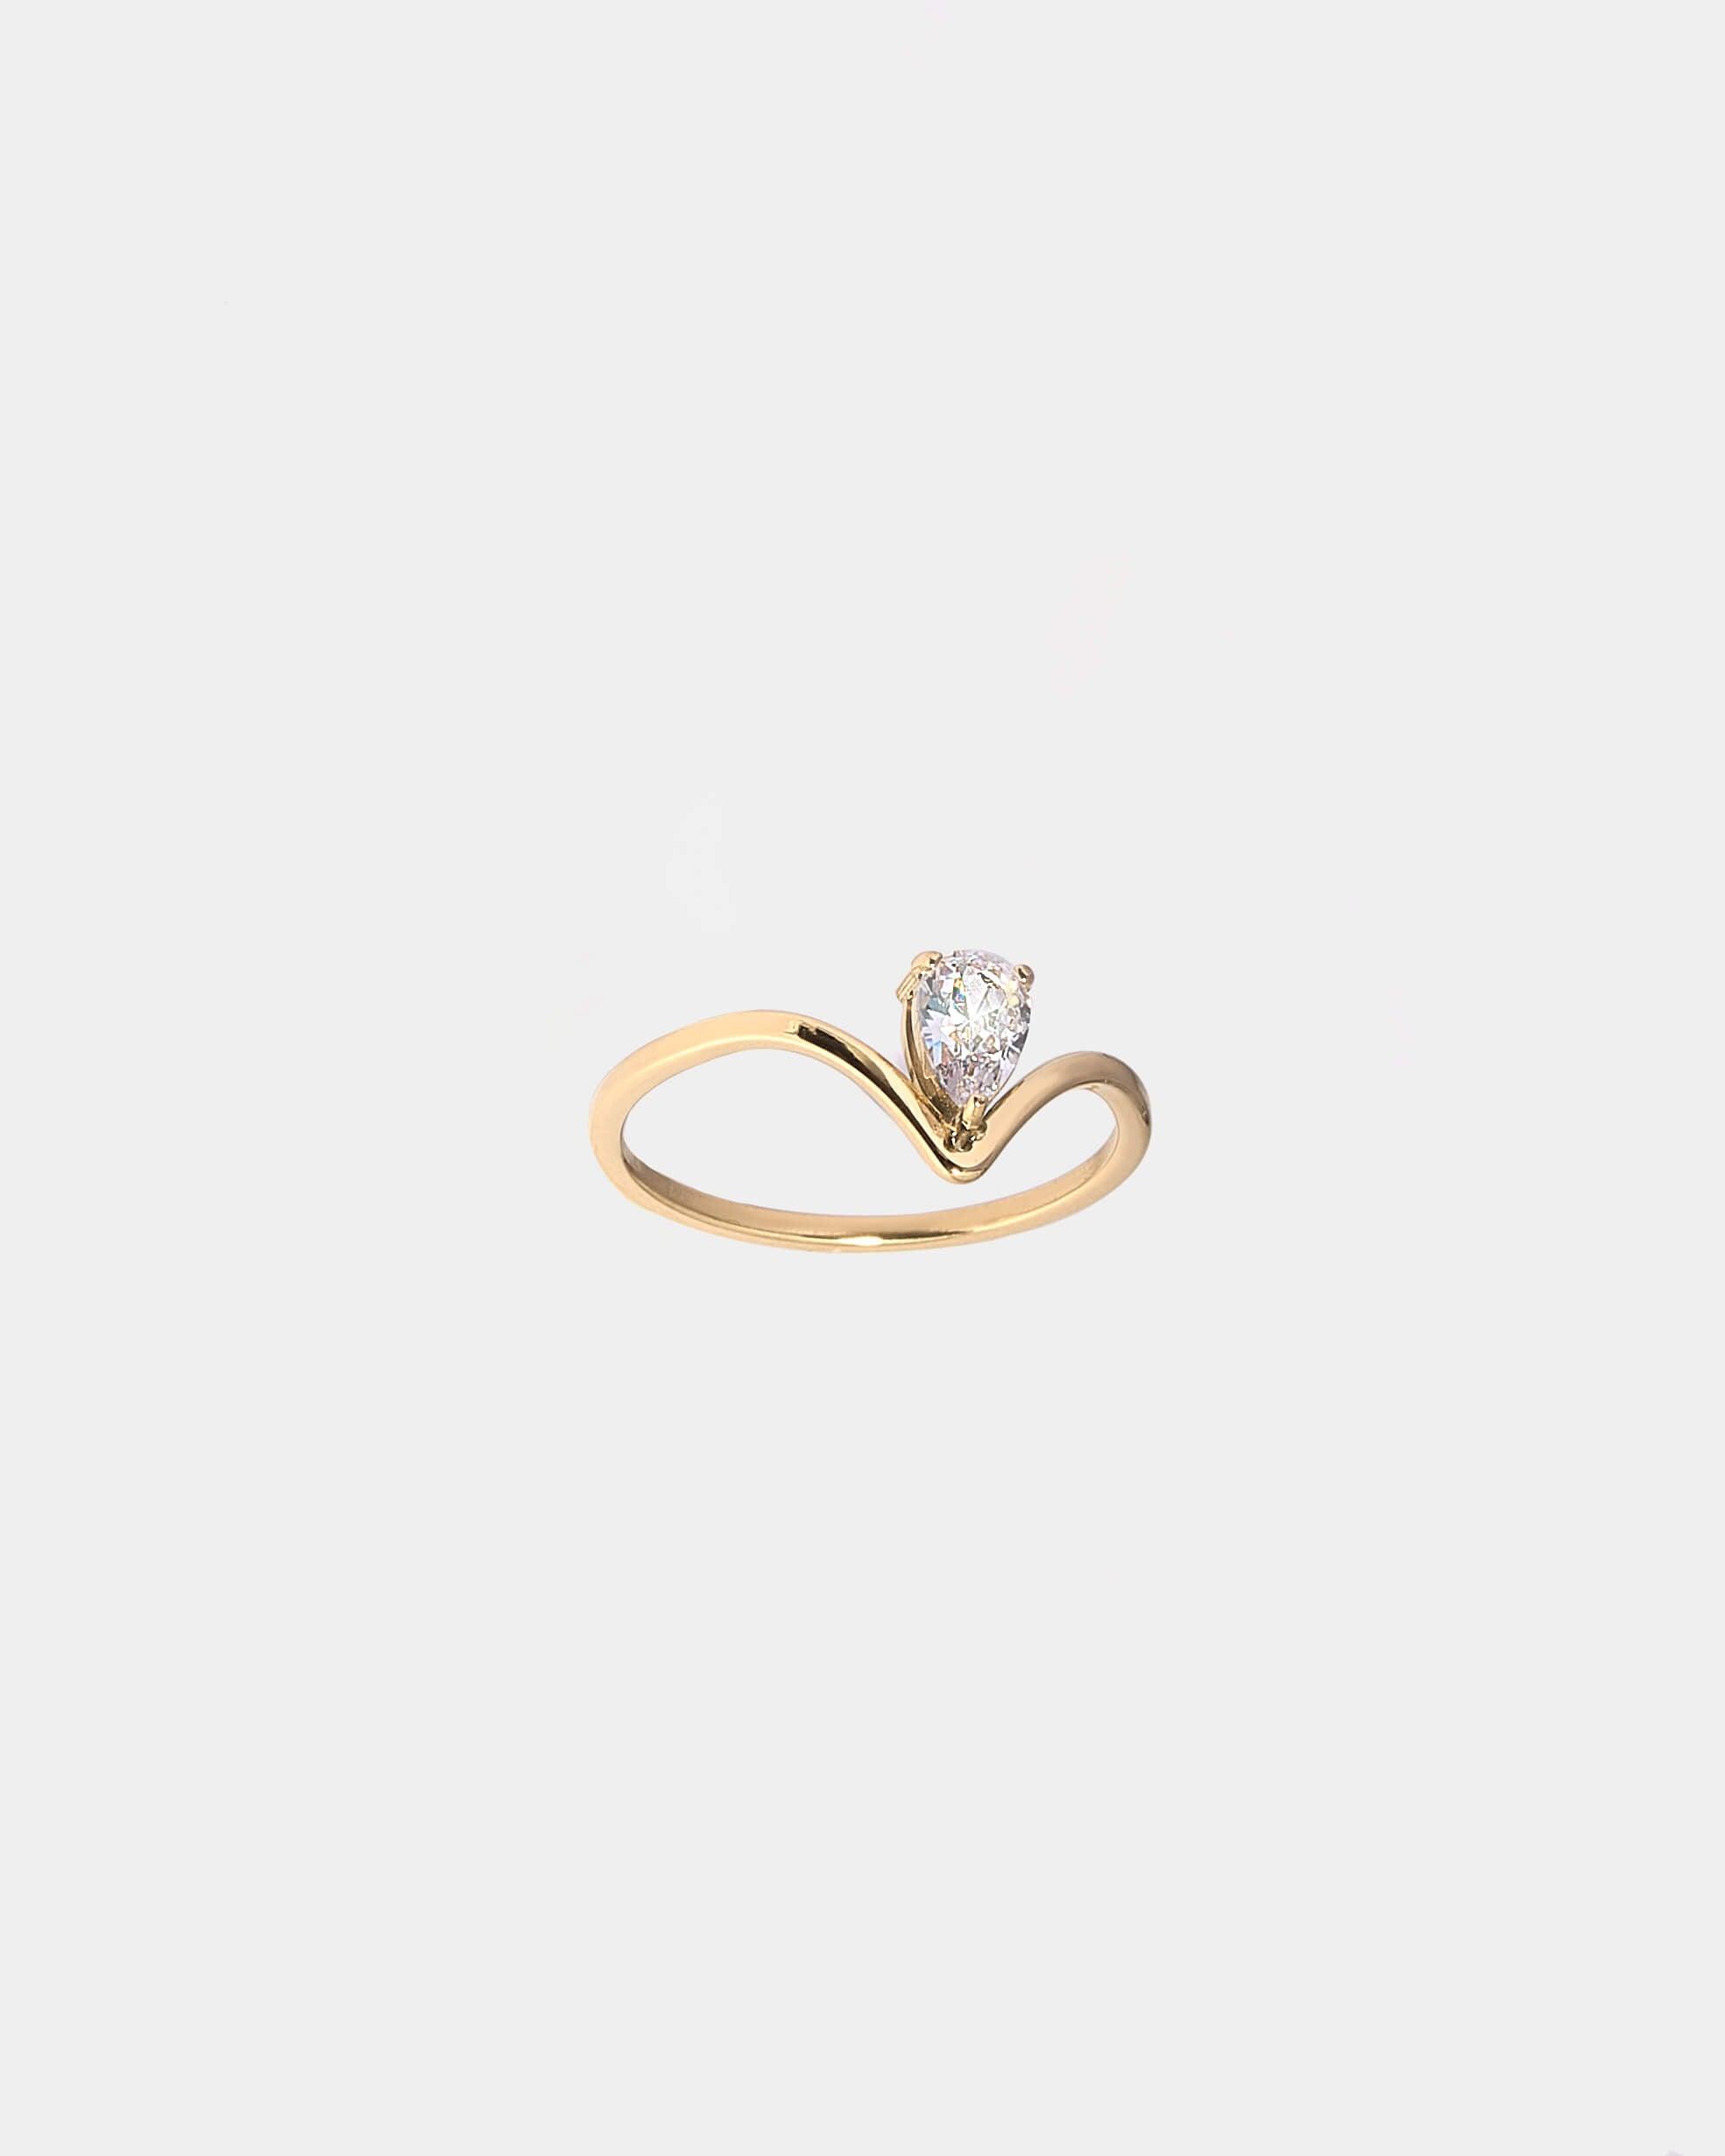 DEWDROP ZIRCON RING - THE LIMELY